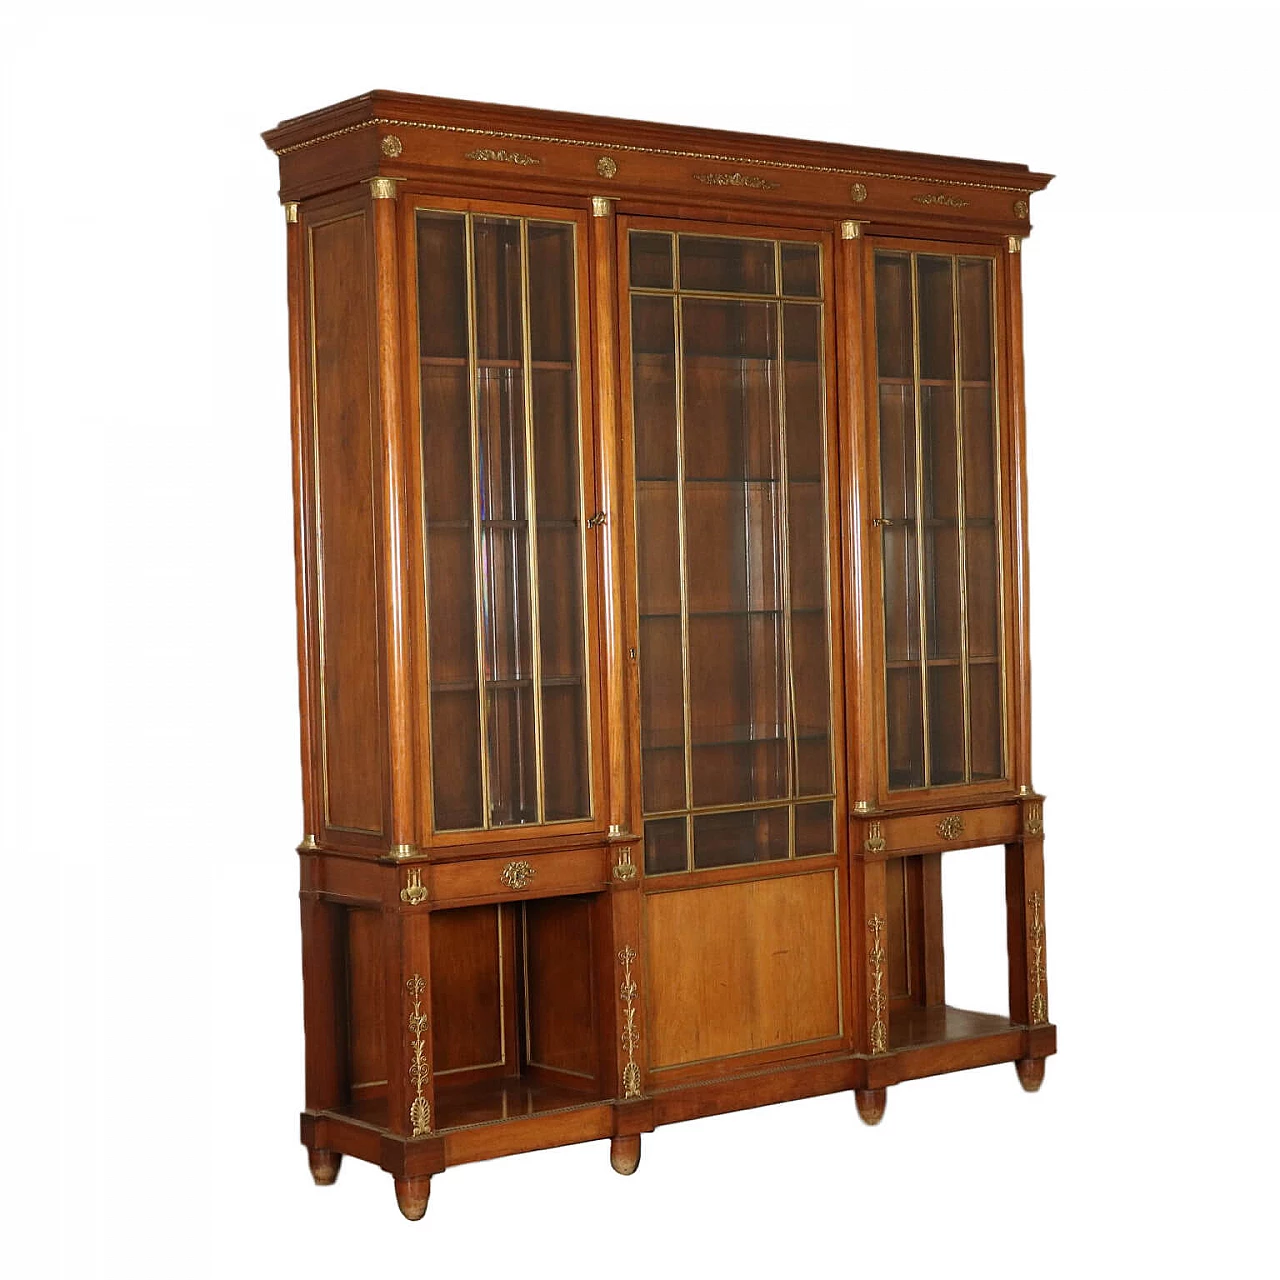 Empire bookcase in mahogany with gilded bronze decorations, 20th century 1431134